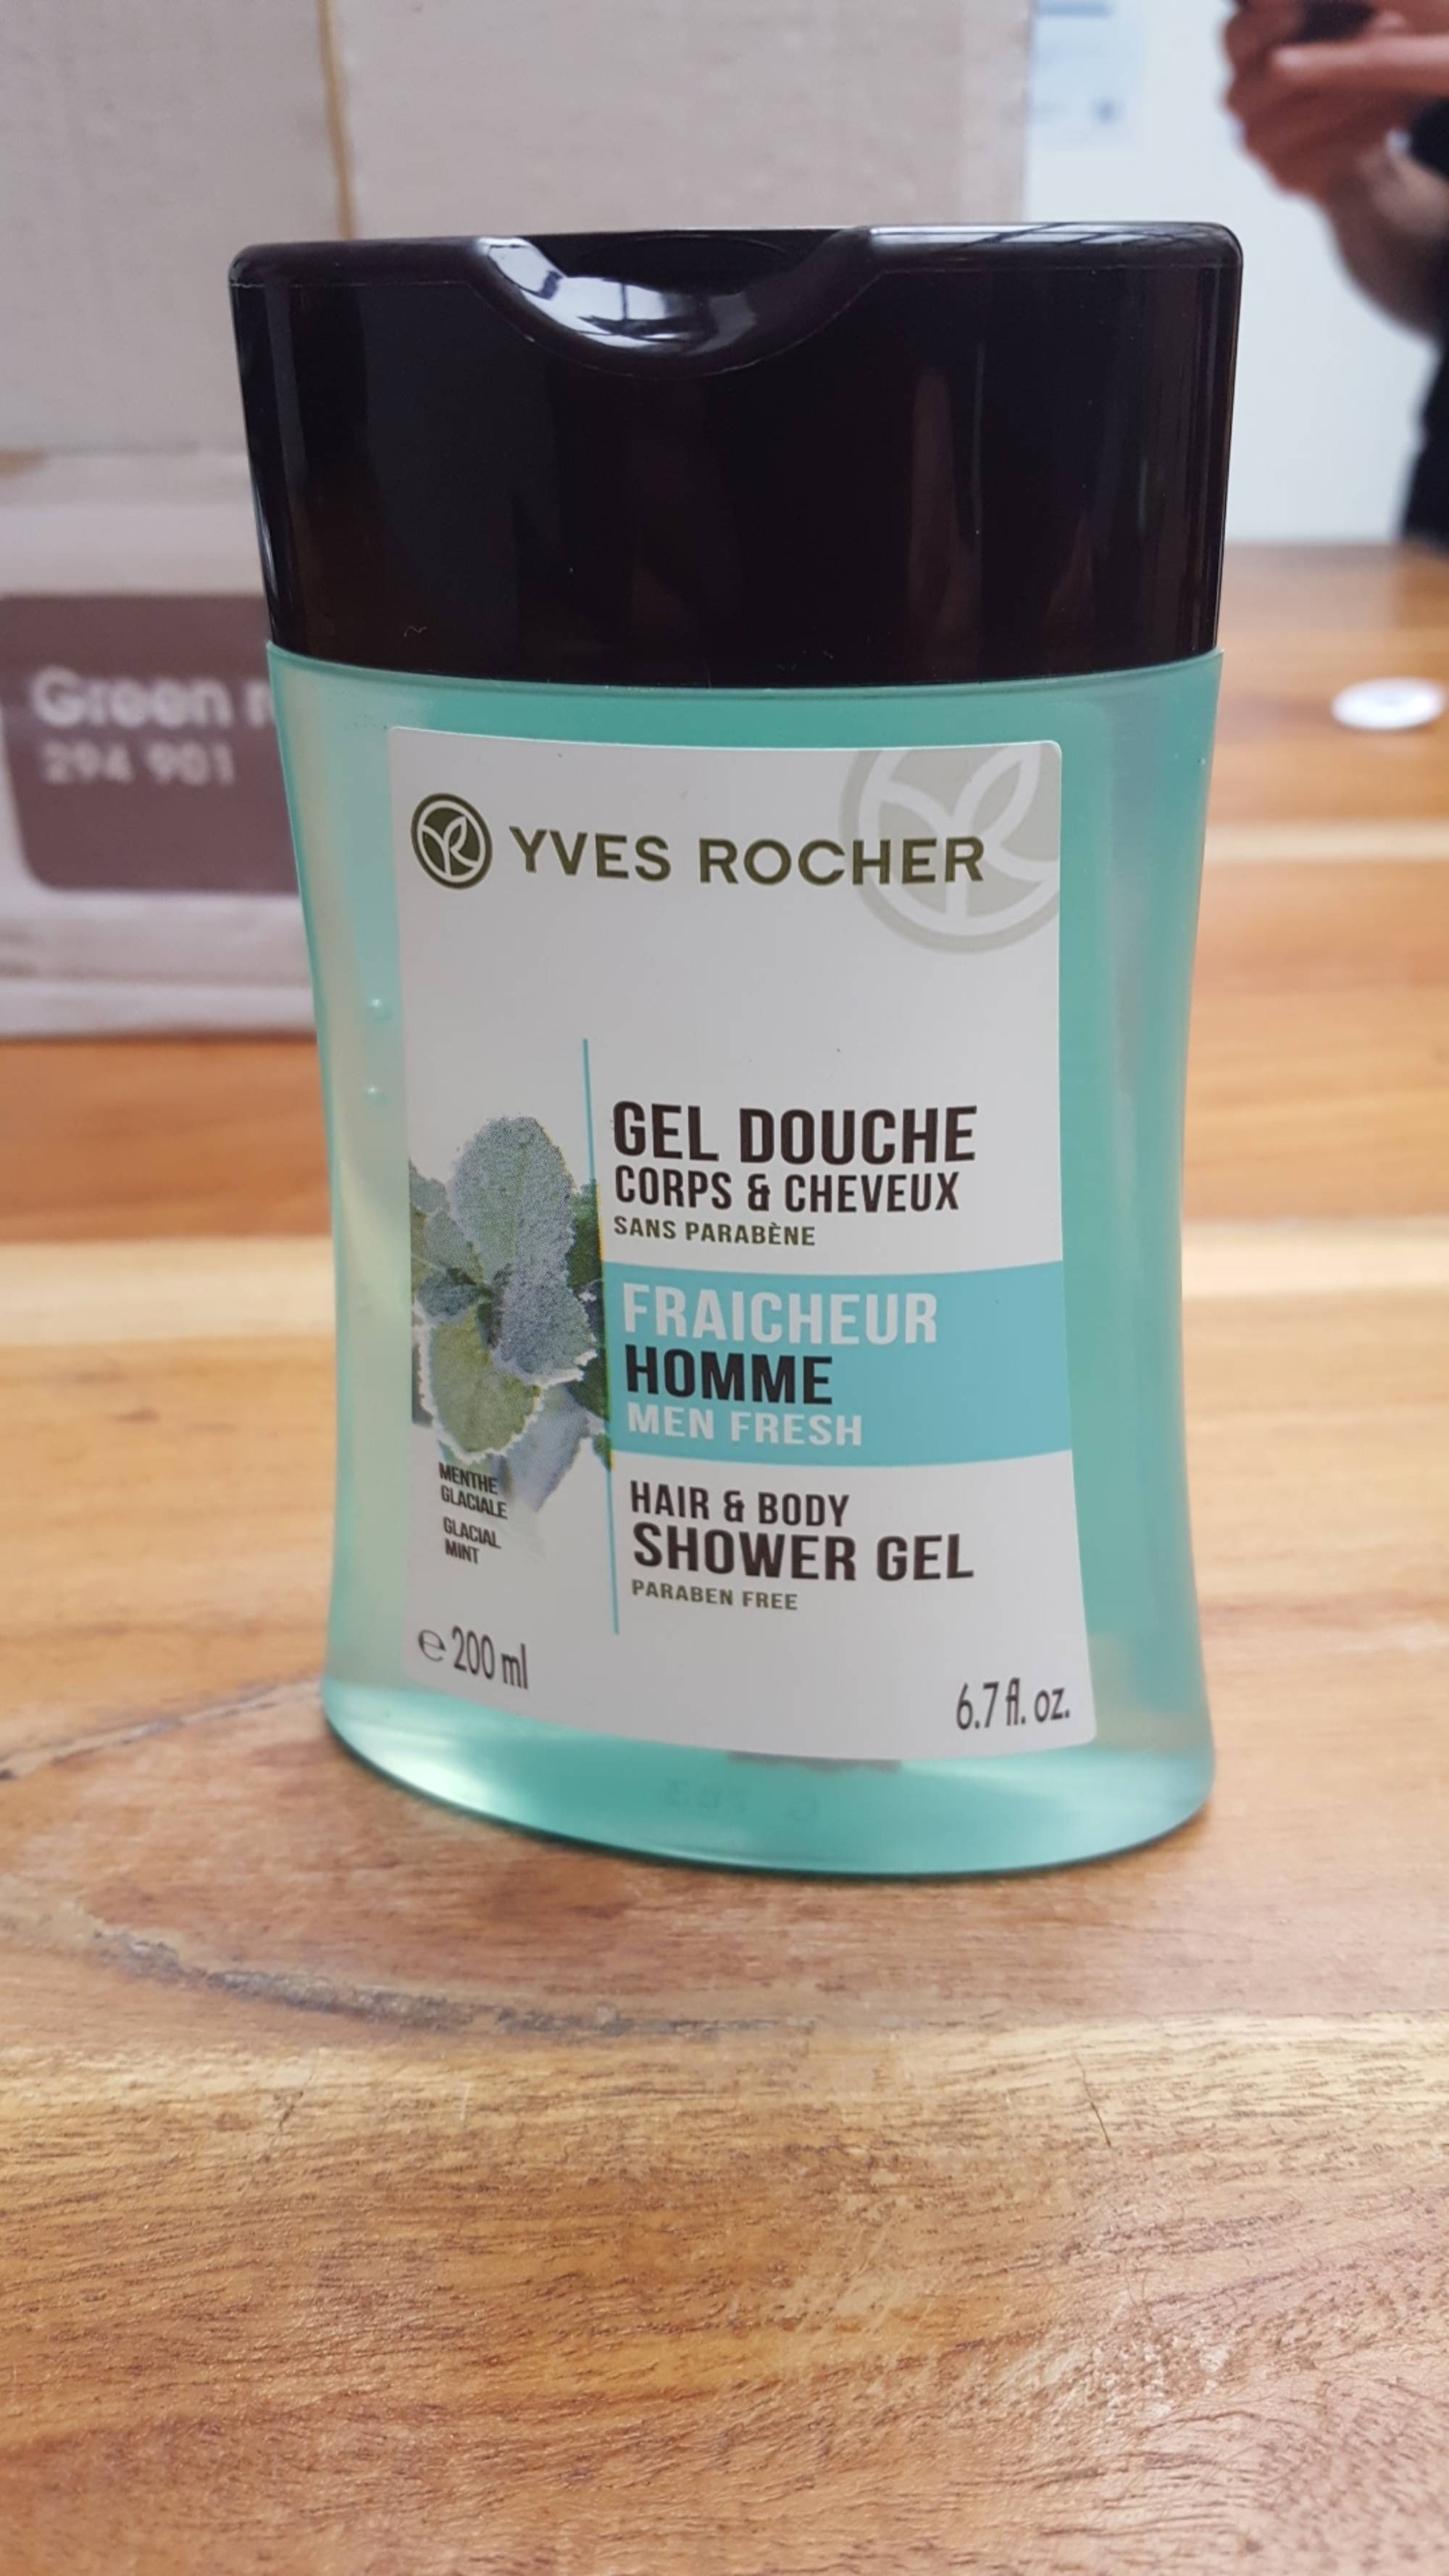 YVES ROCHER - Gel douche corps & cheveux